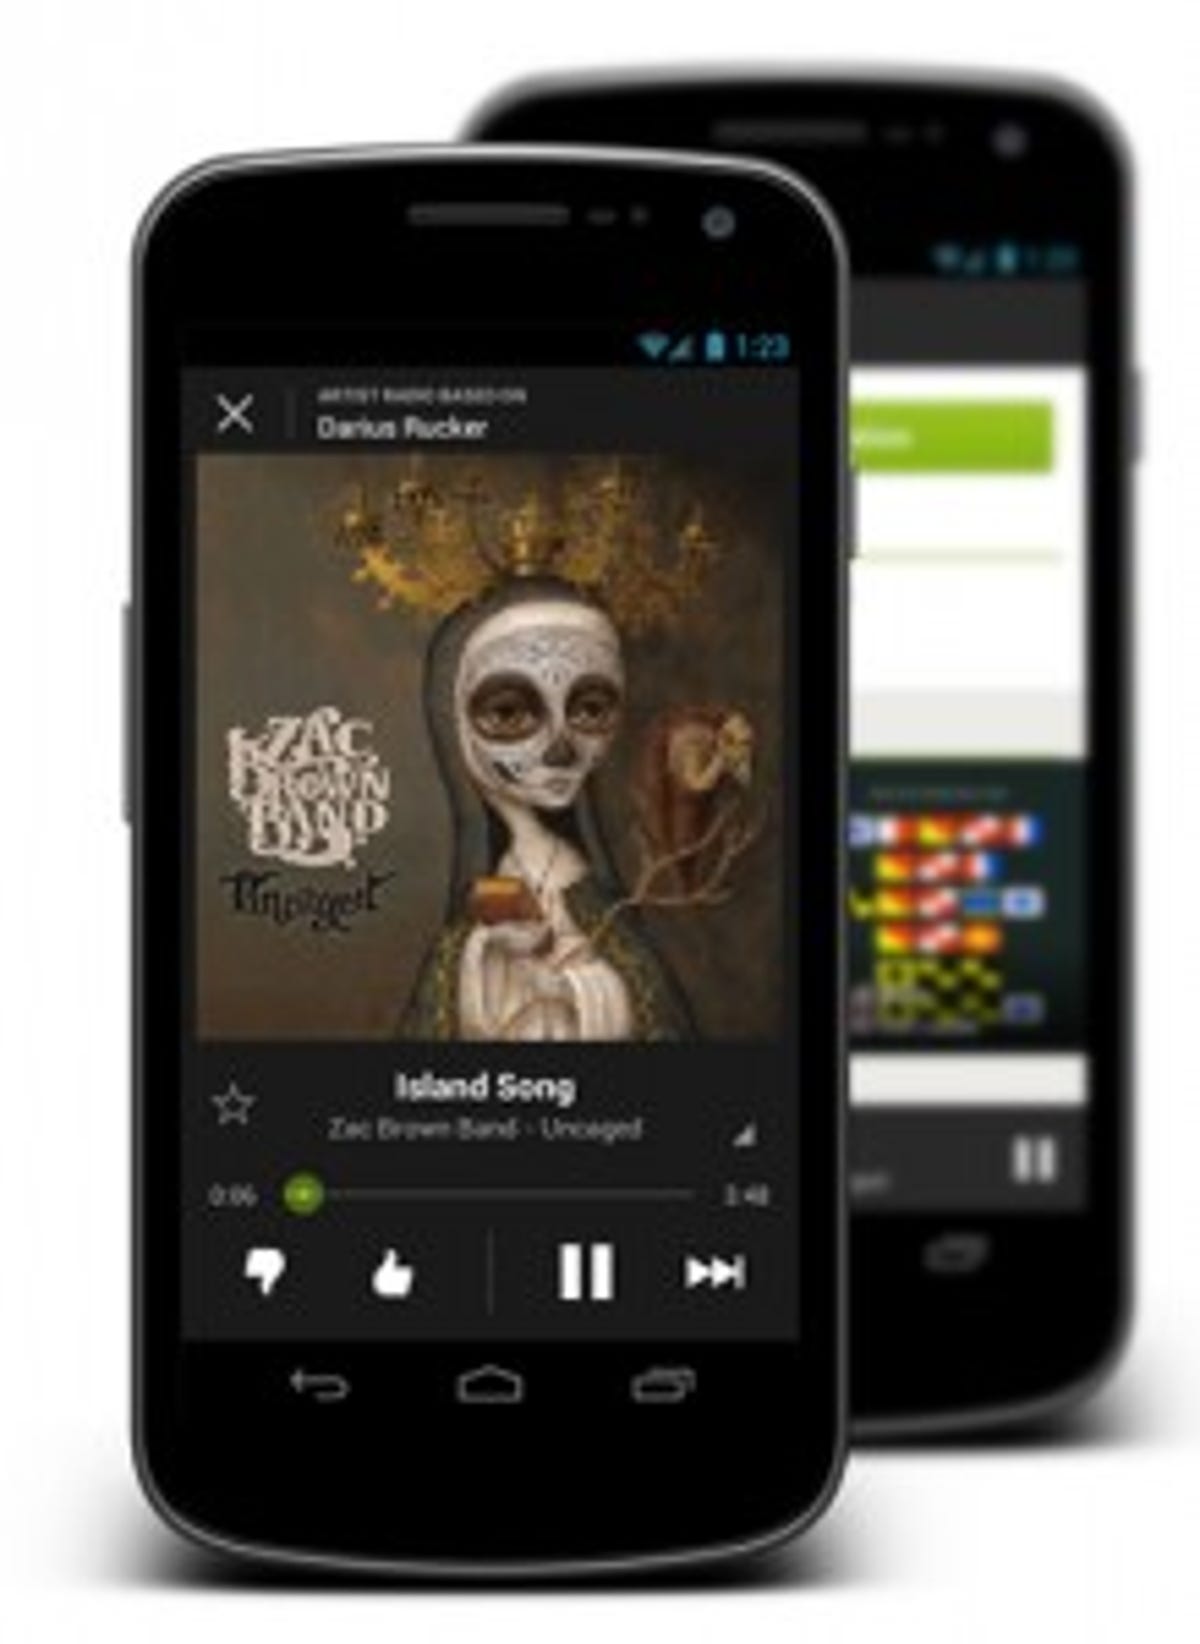 Spotify running on Android.